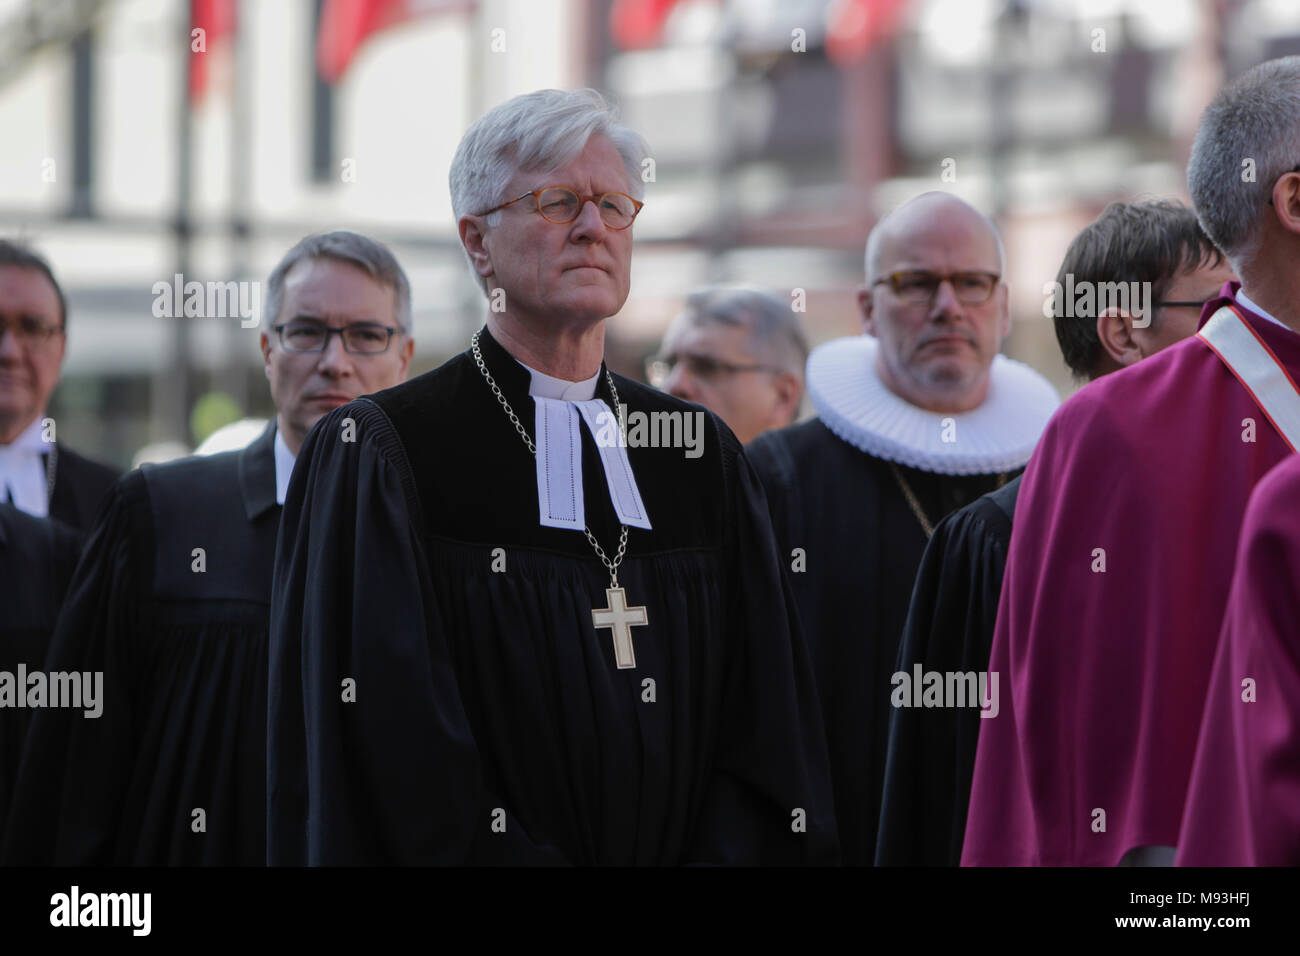 A group of Evangelical pastors and bishops walk in the funeral procession of Cardinal Karl Lehmann. Among them is the Bishop of the Evangelical Lutheran Church in Bavaria and Chairman of the Council of the EKD Heinrich Bedford-Strohm (centre). The funeral of Cardinal Karl Lehmann was held in the Mainz Cathedral, following a funeral procession from the Augustiner church were he was lying in repose. German President Frank-Walter Steinmeier attended the funeral as representative of the German state. Cardinal Karl Lehmann was the bishop of the Roman Catholic Diocese of Mainz for 33 years until his Stock Photo